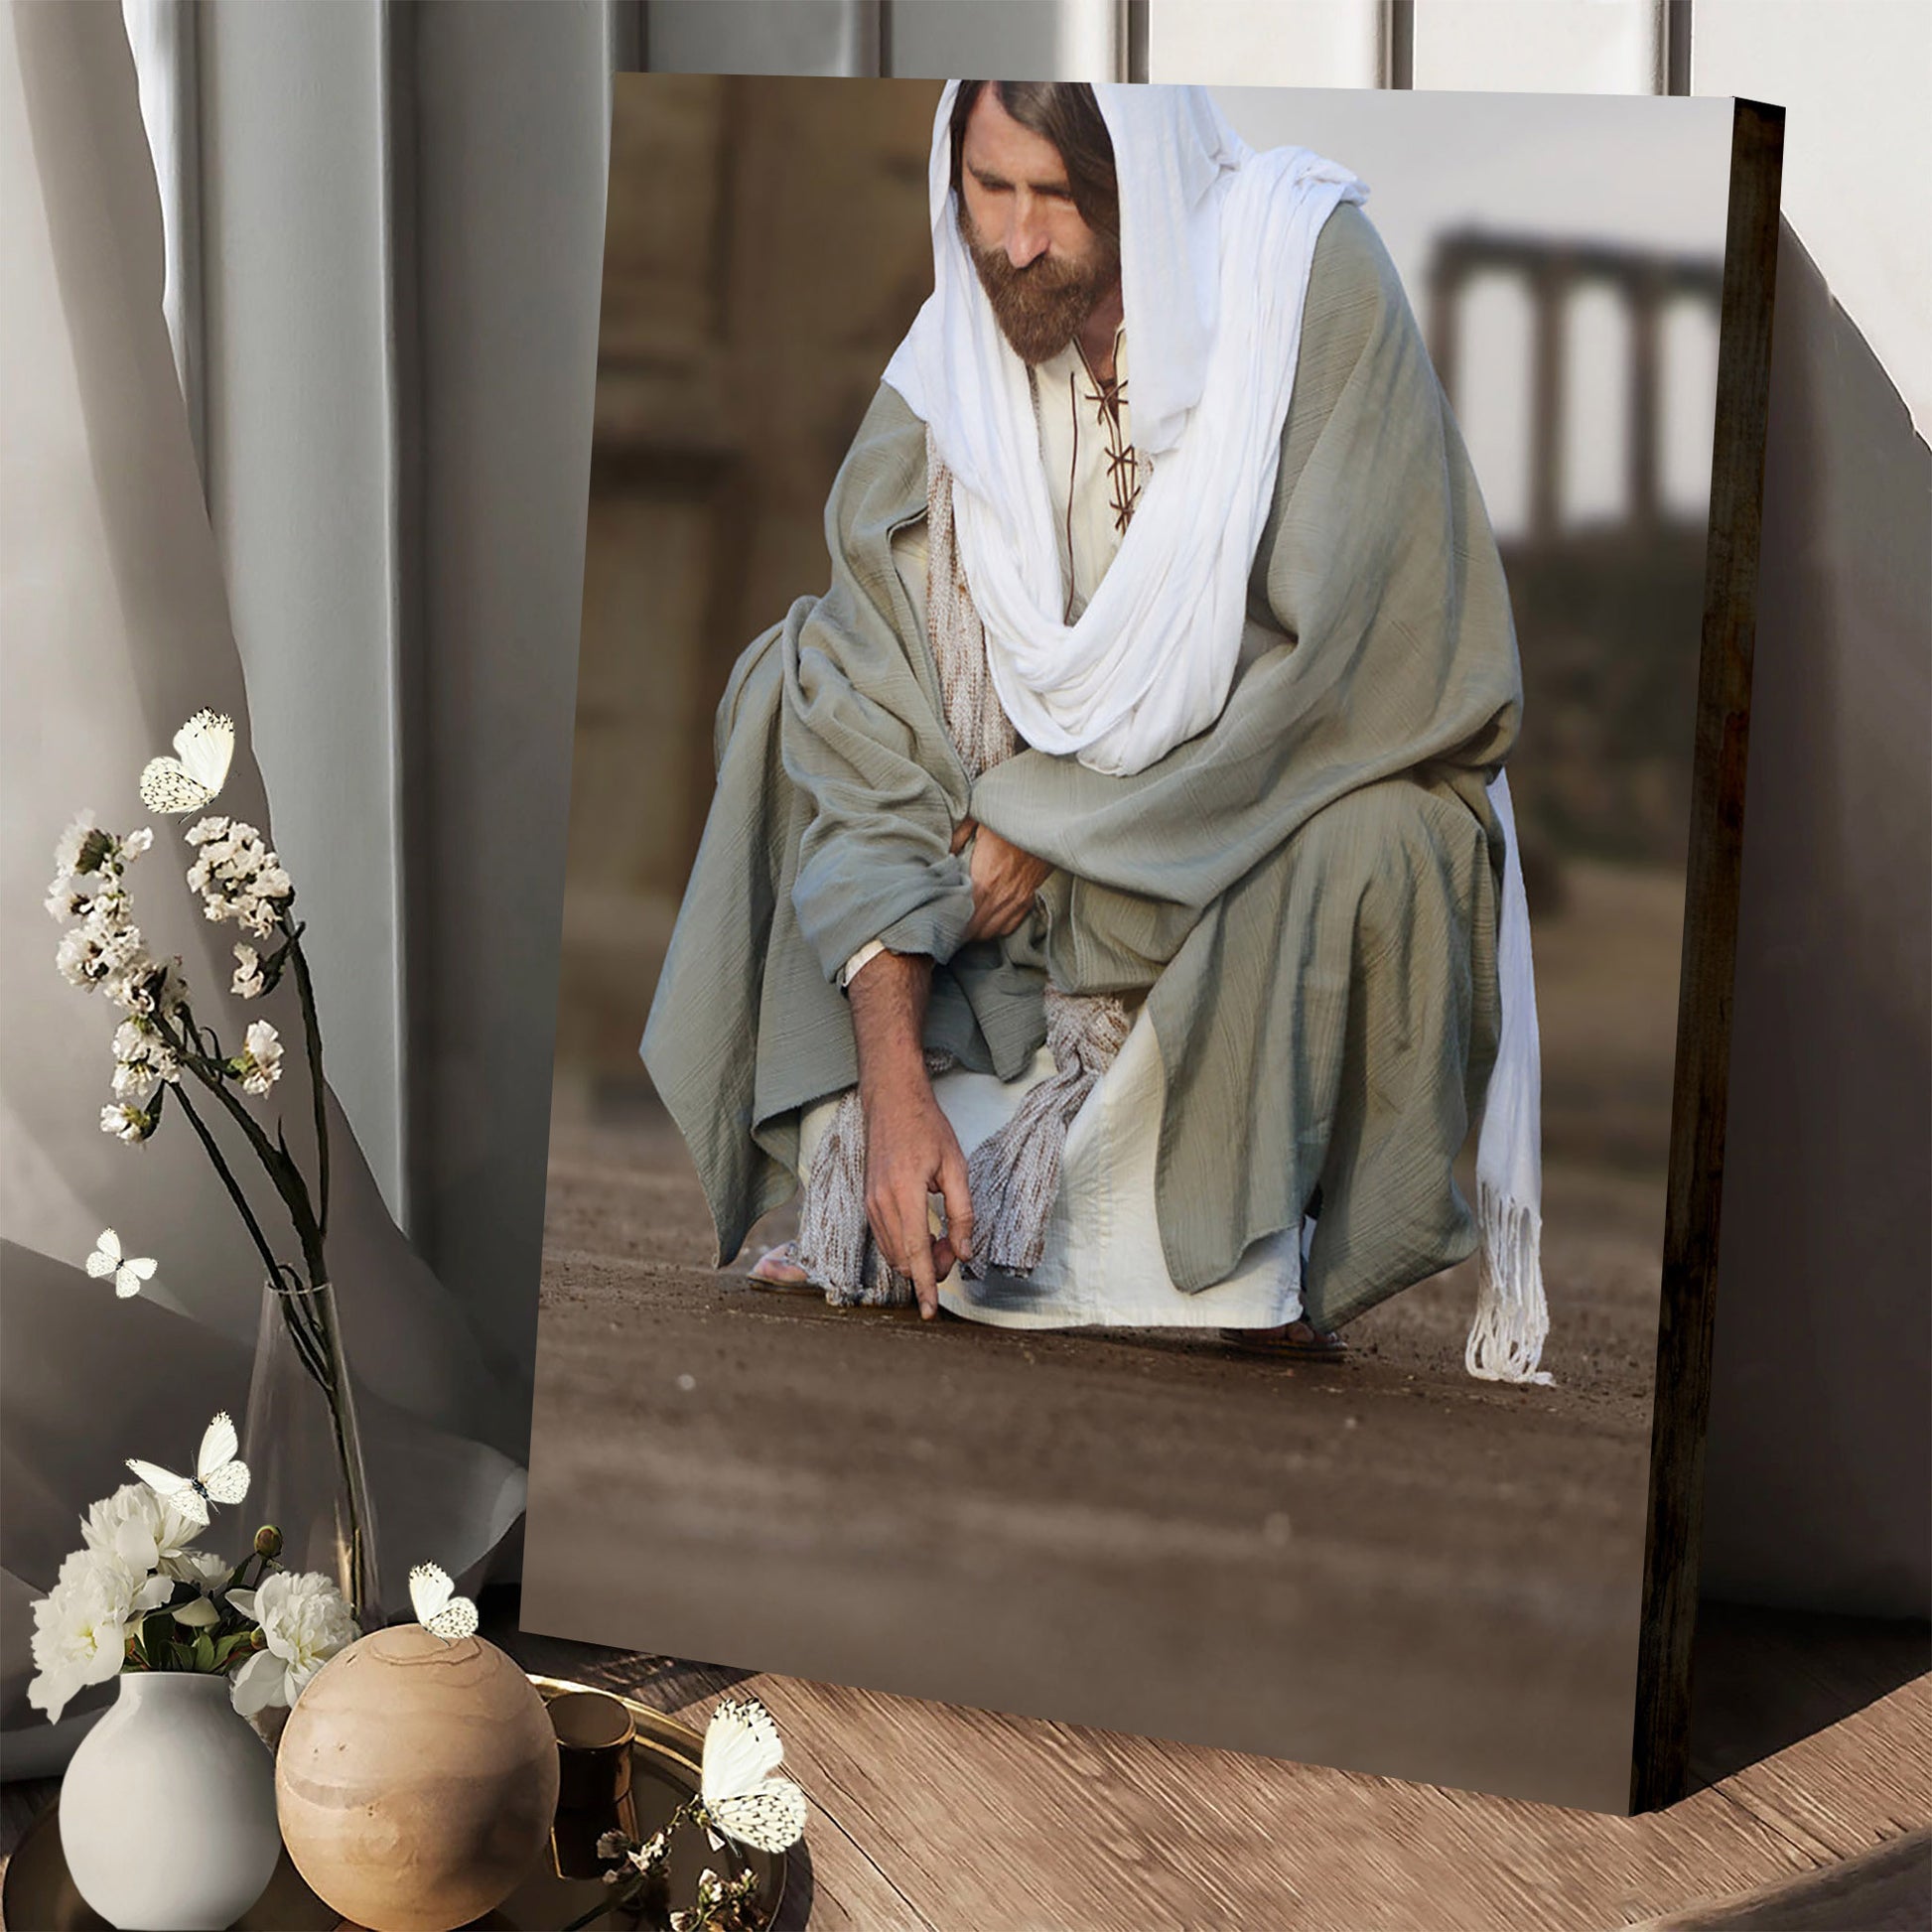 Go Thy Way Canvas Wall Art - Jesus Canvas Pictures - Christian Canvas Wall Art